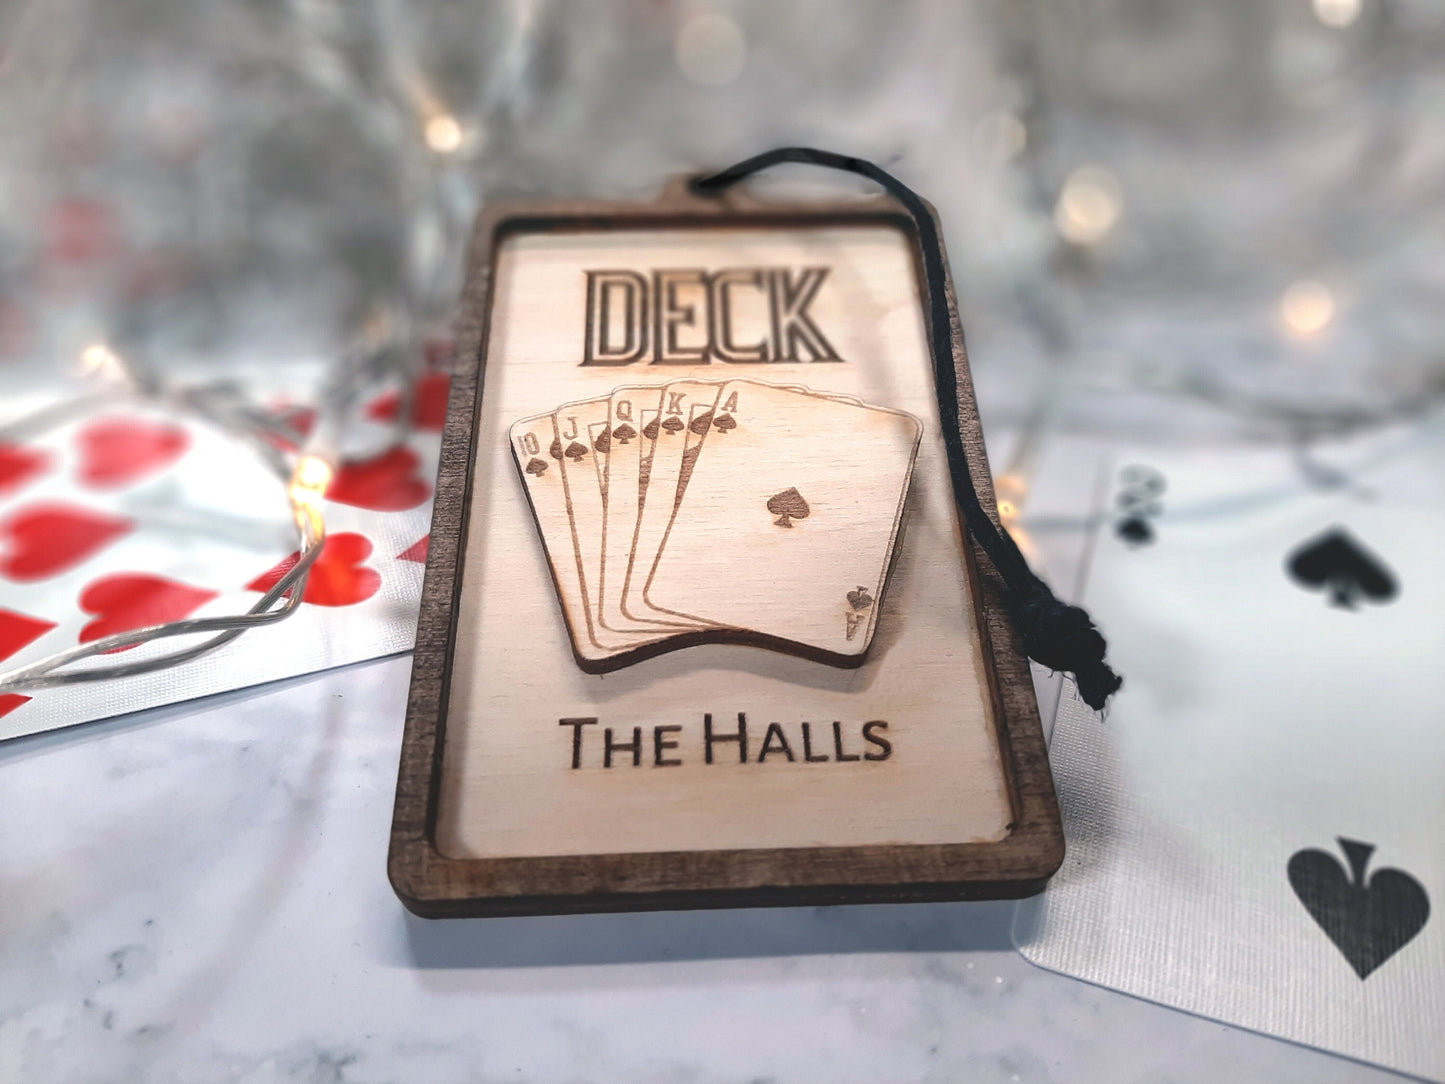 DECK The Halls - Christmas Ornament - Playing Cards Holiday Decoration